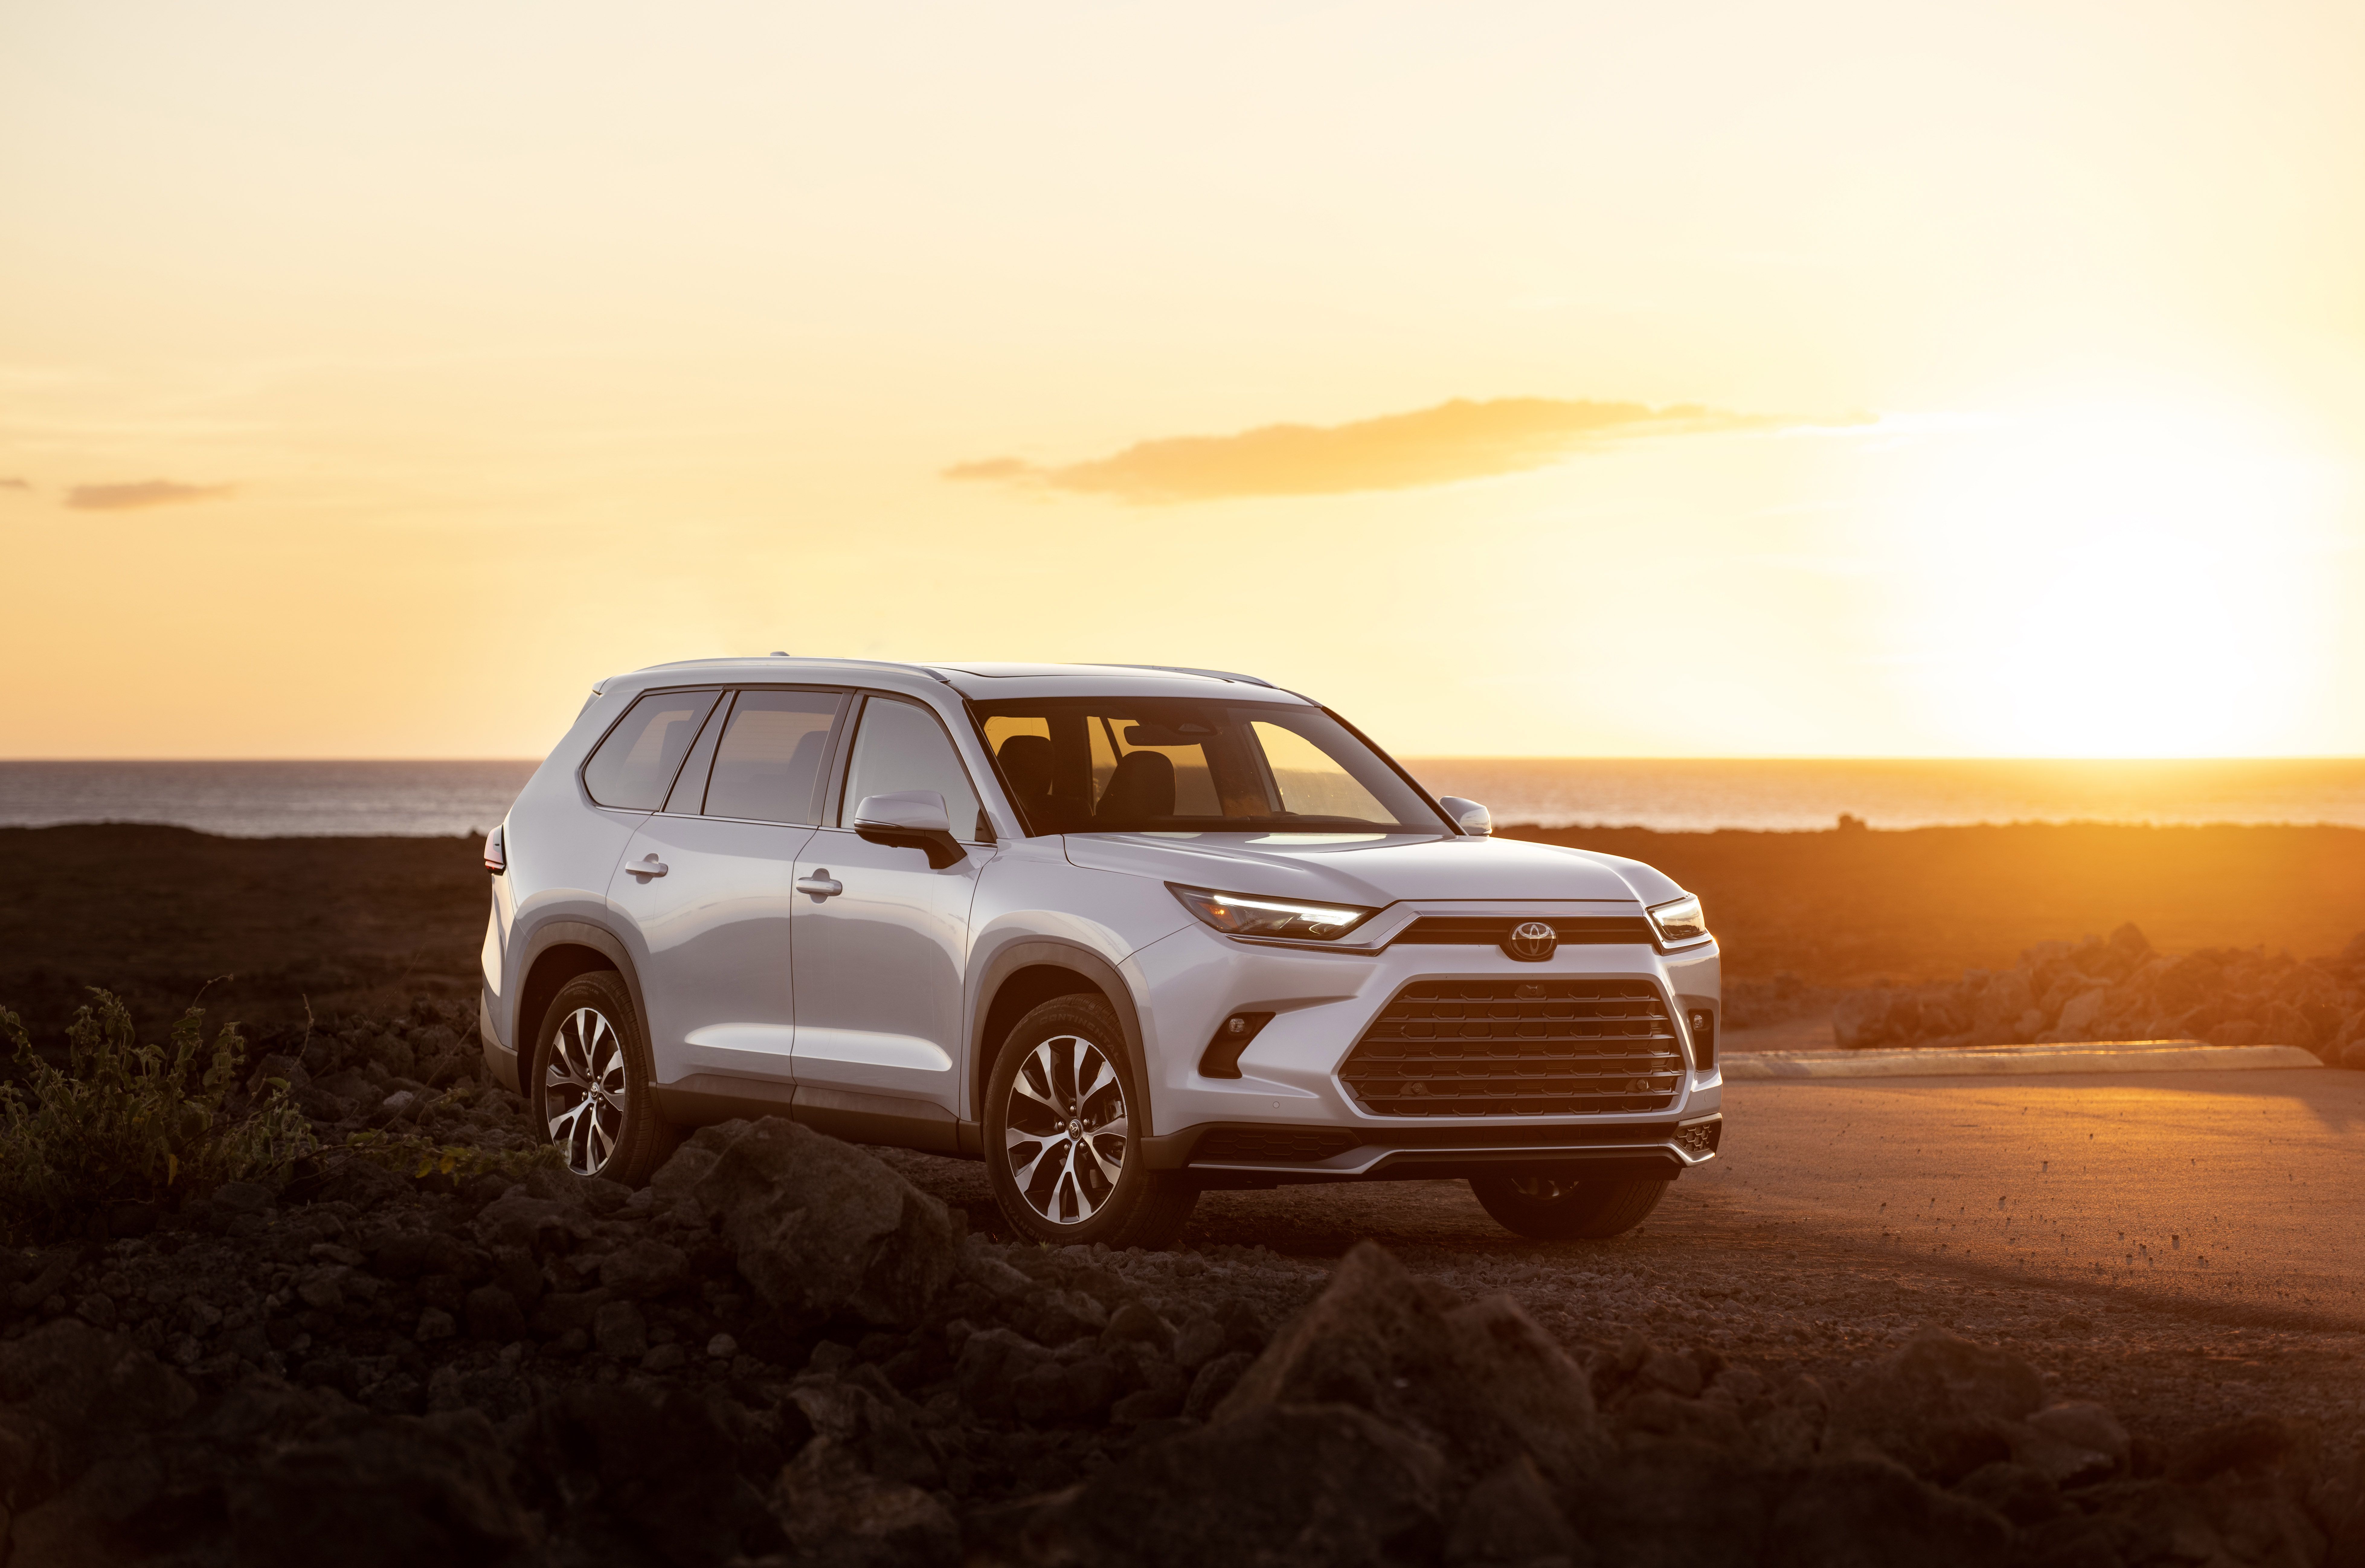 2023 Toyota Highlander turbo review: the Hybrid is better